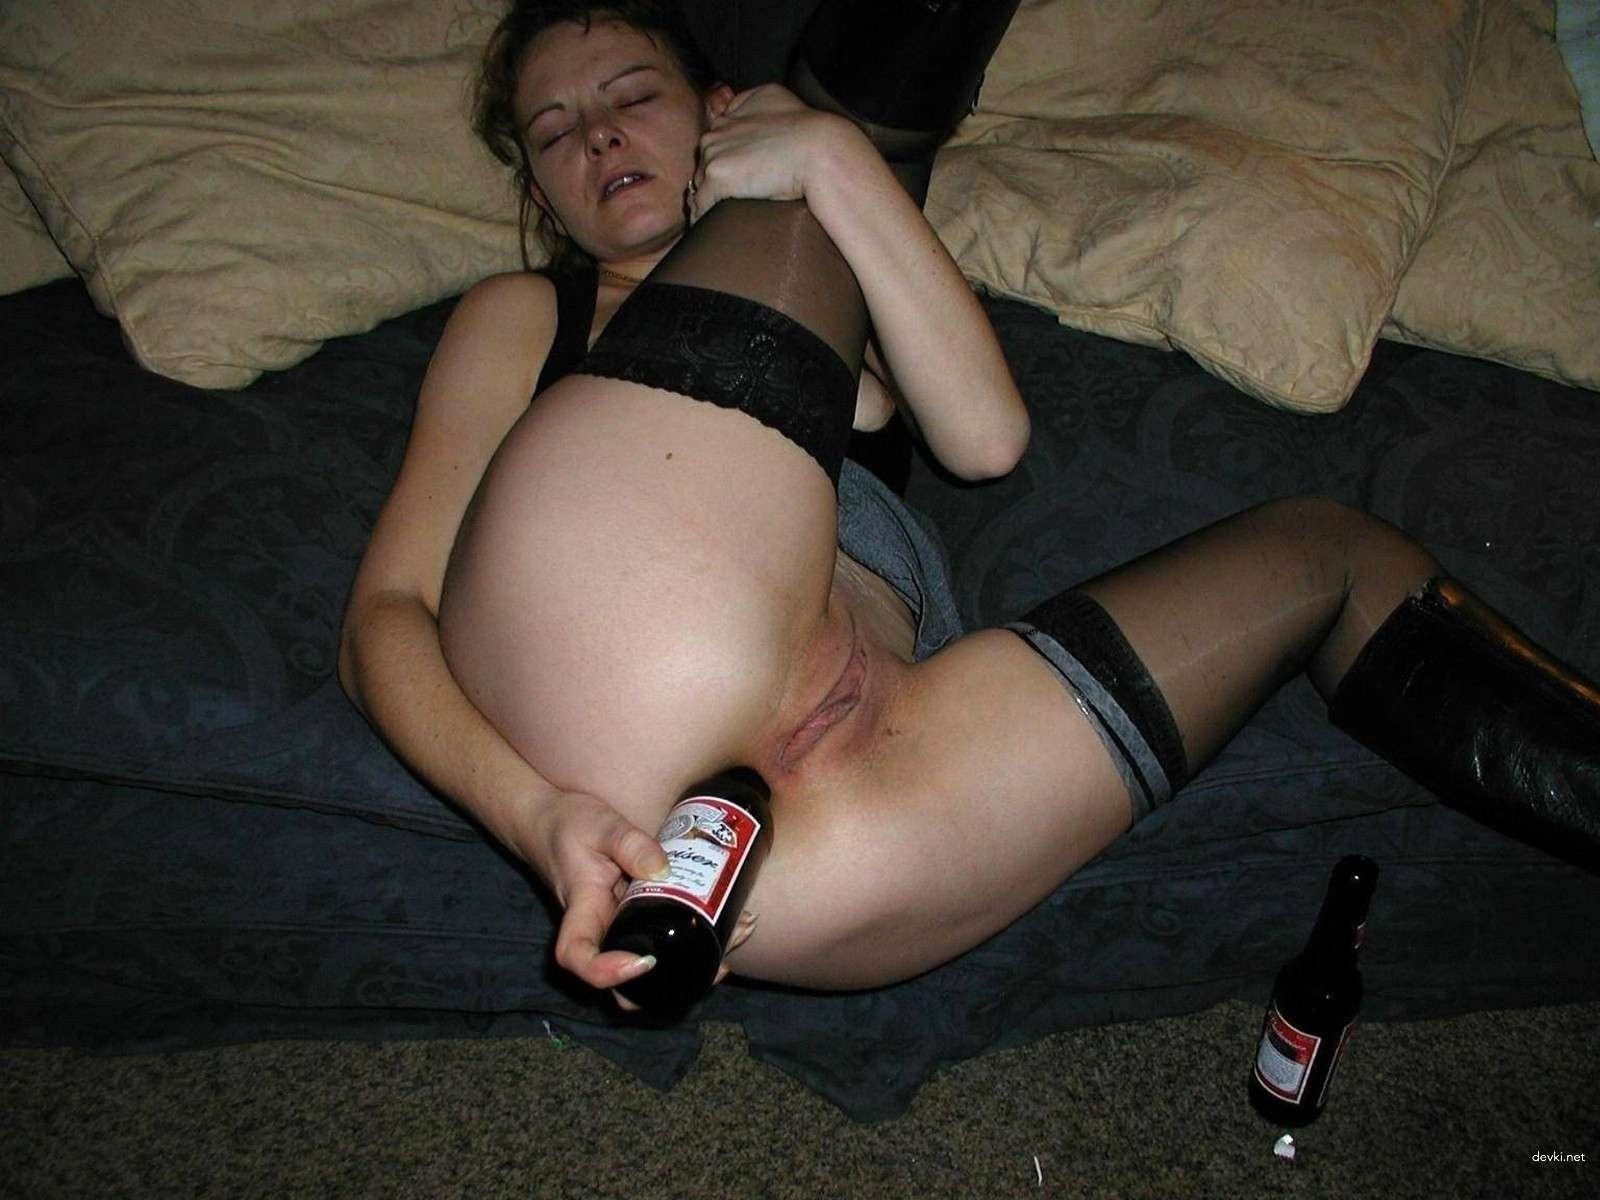 Fucking HIS WIFE with A Bottle (87 photos) - sex eporner pics